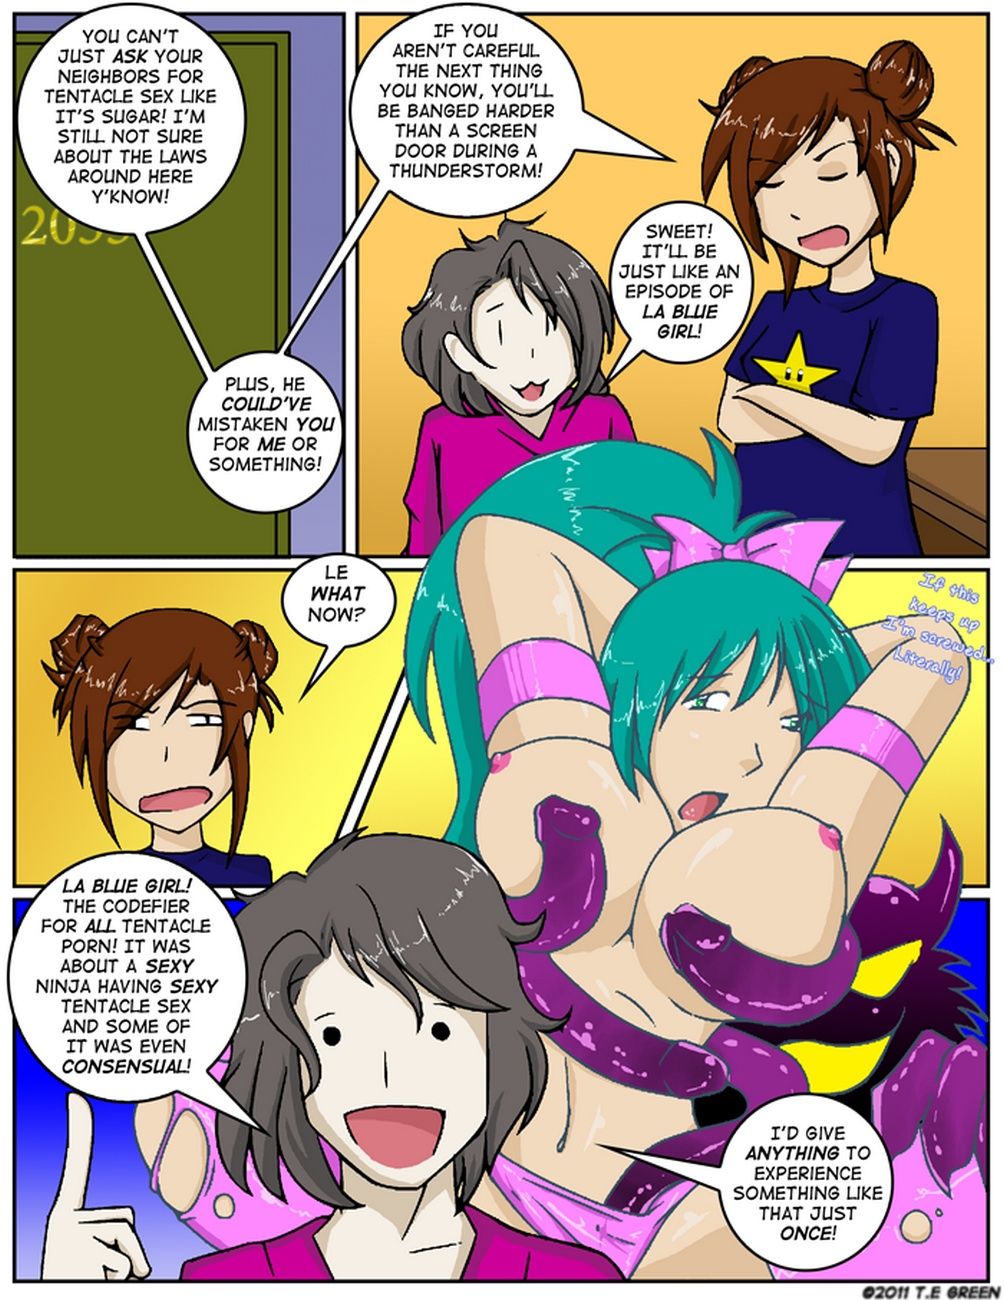 A Date With A Tentacle Monster 3 - Tentacle Hospitality page 6